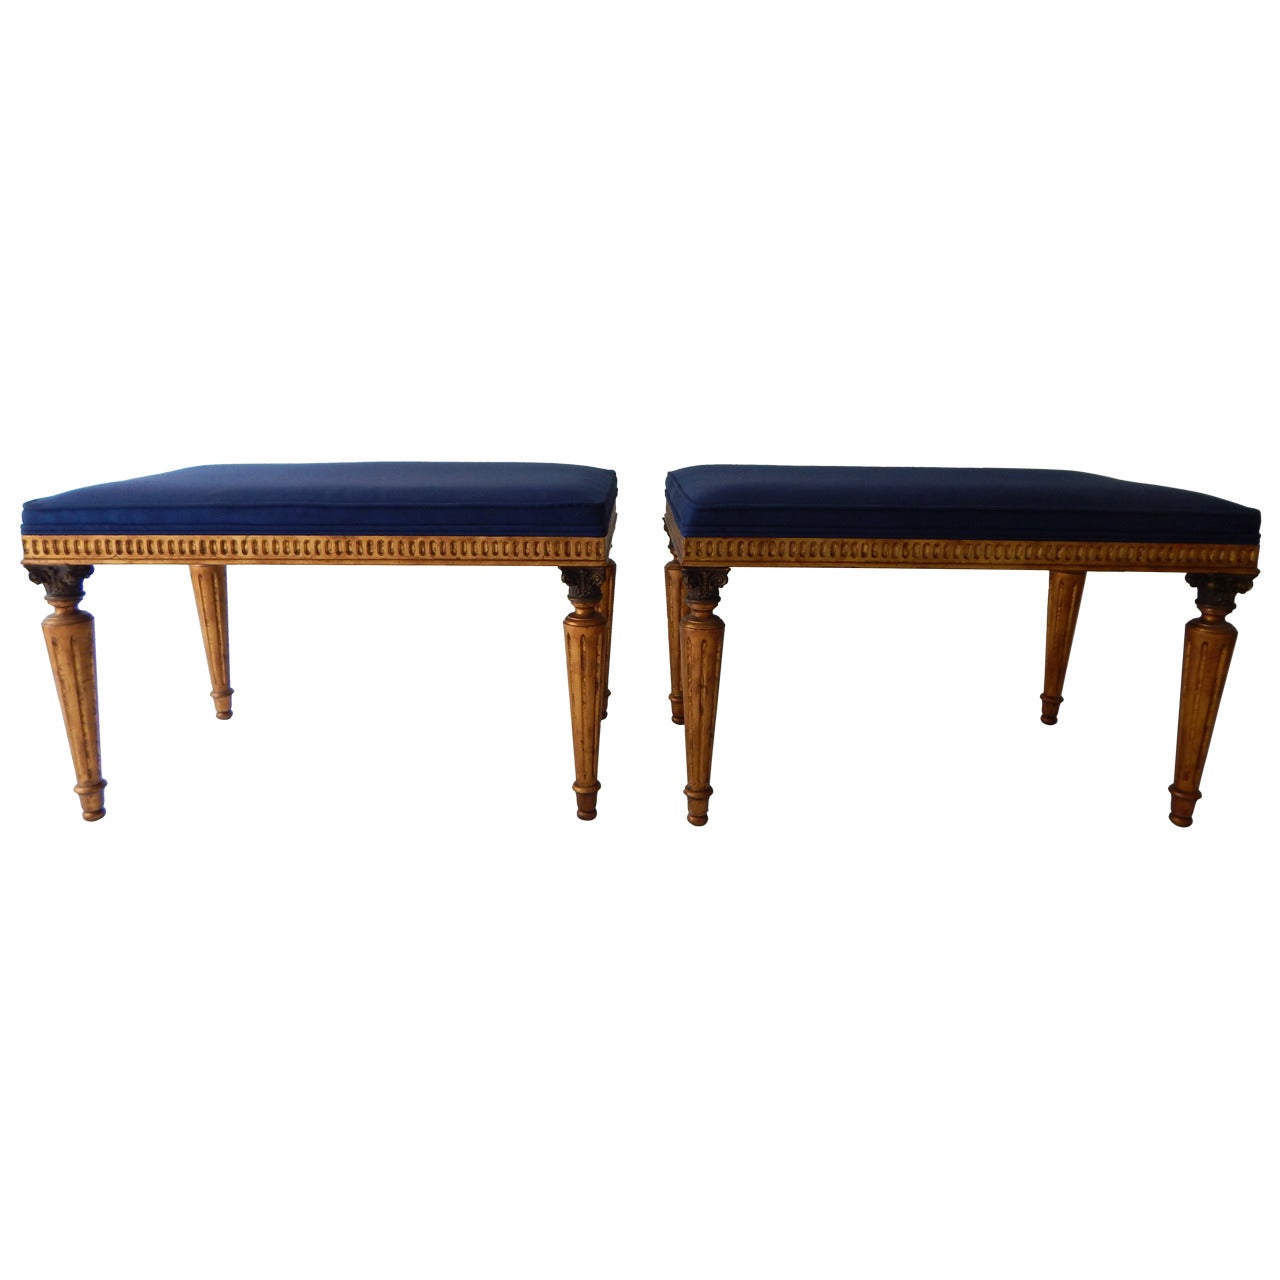 Pair of Neoclassic Benches